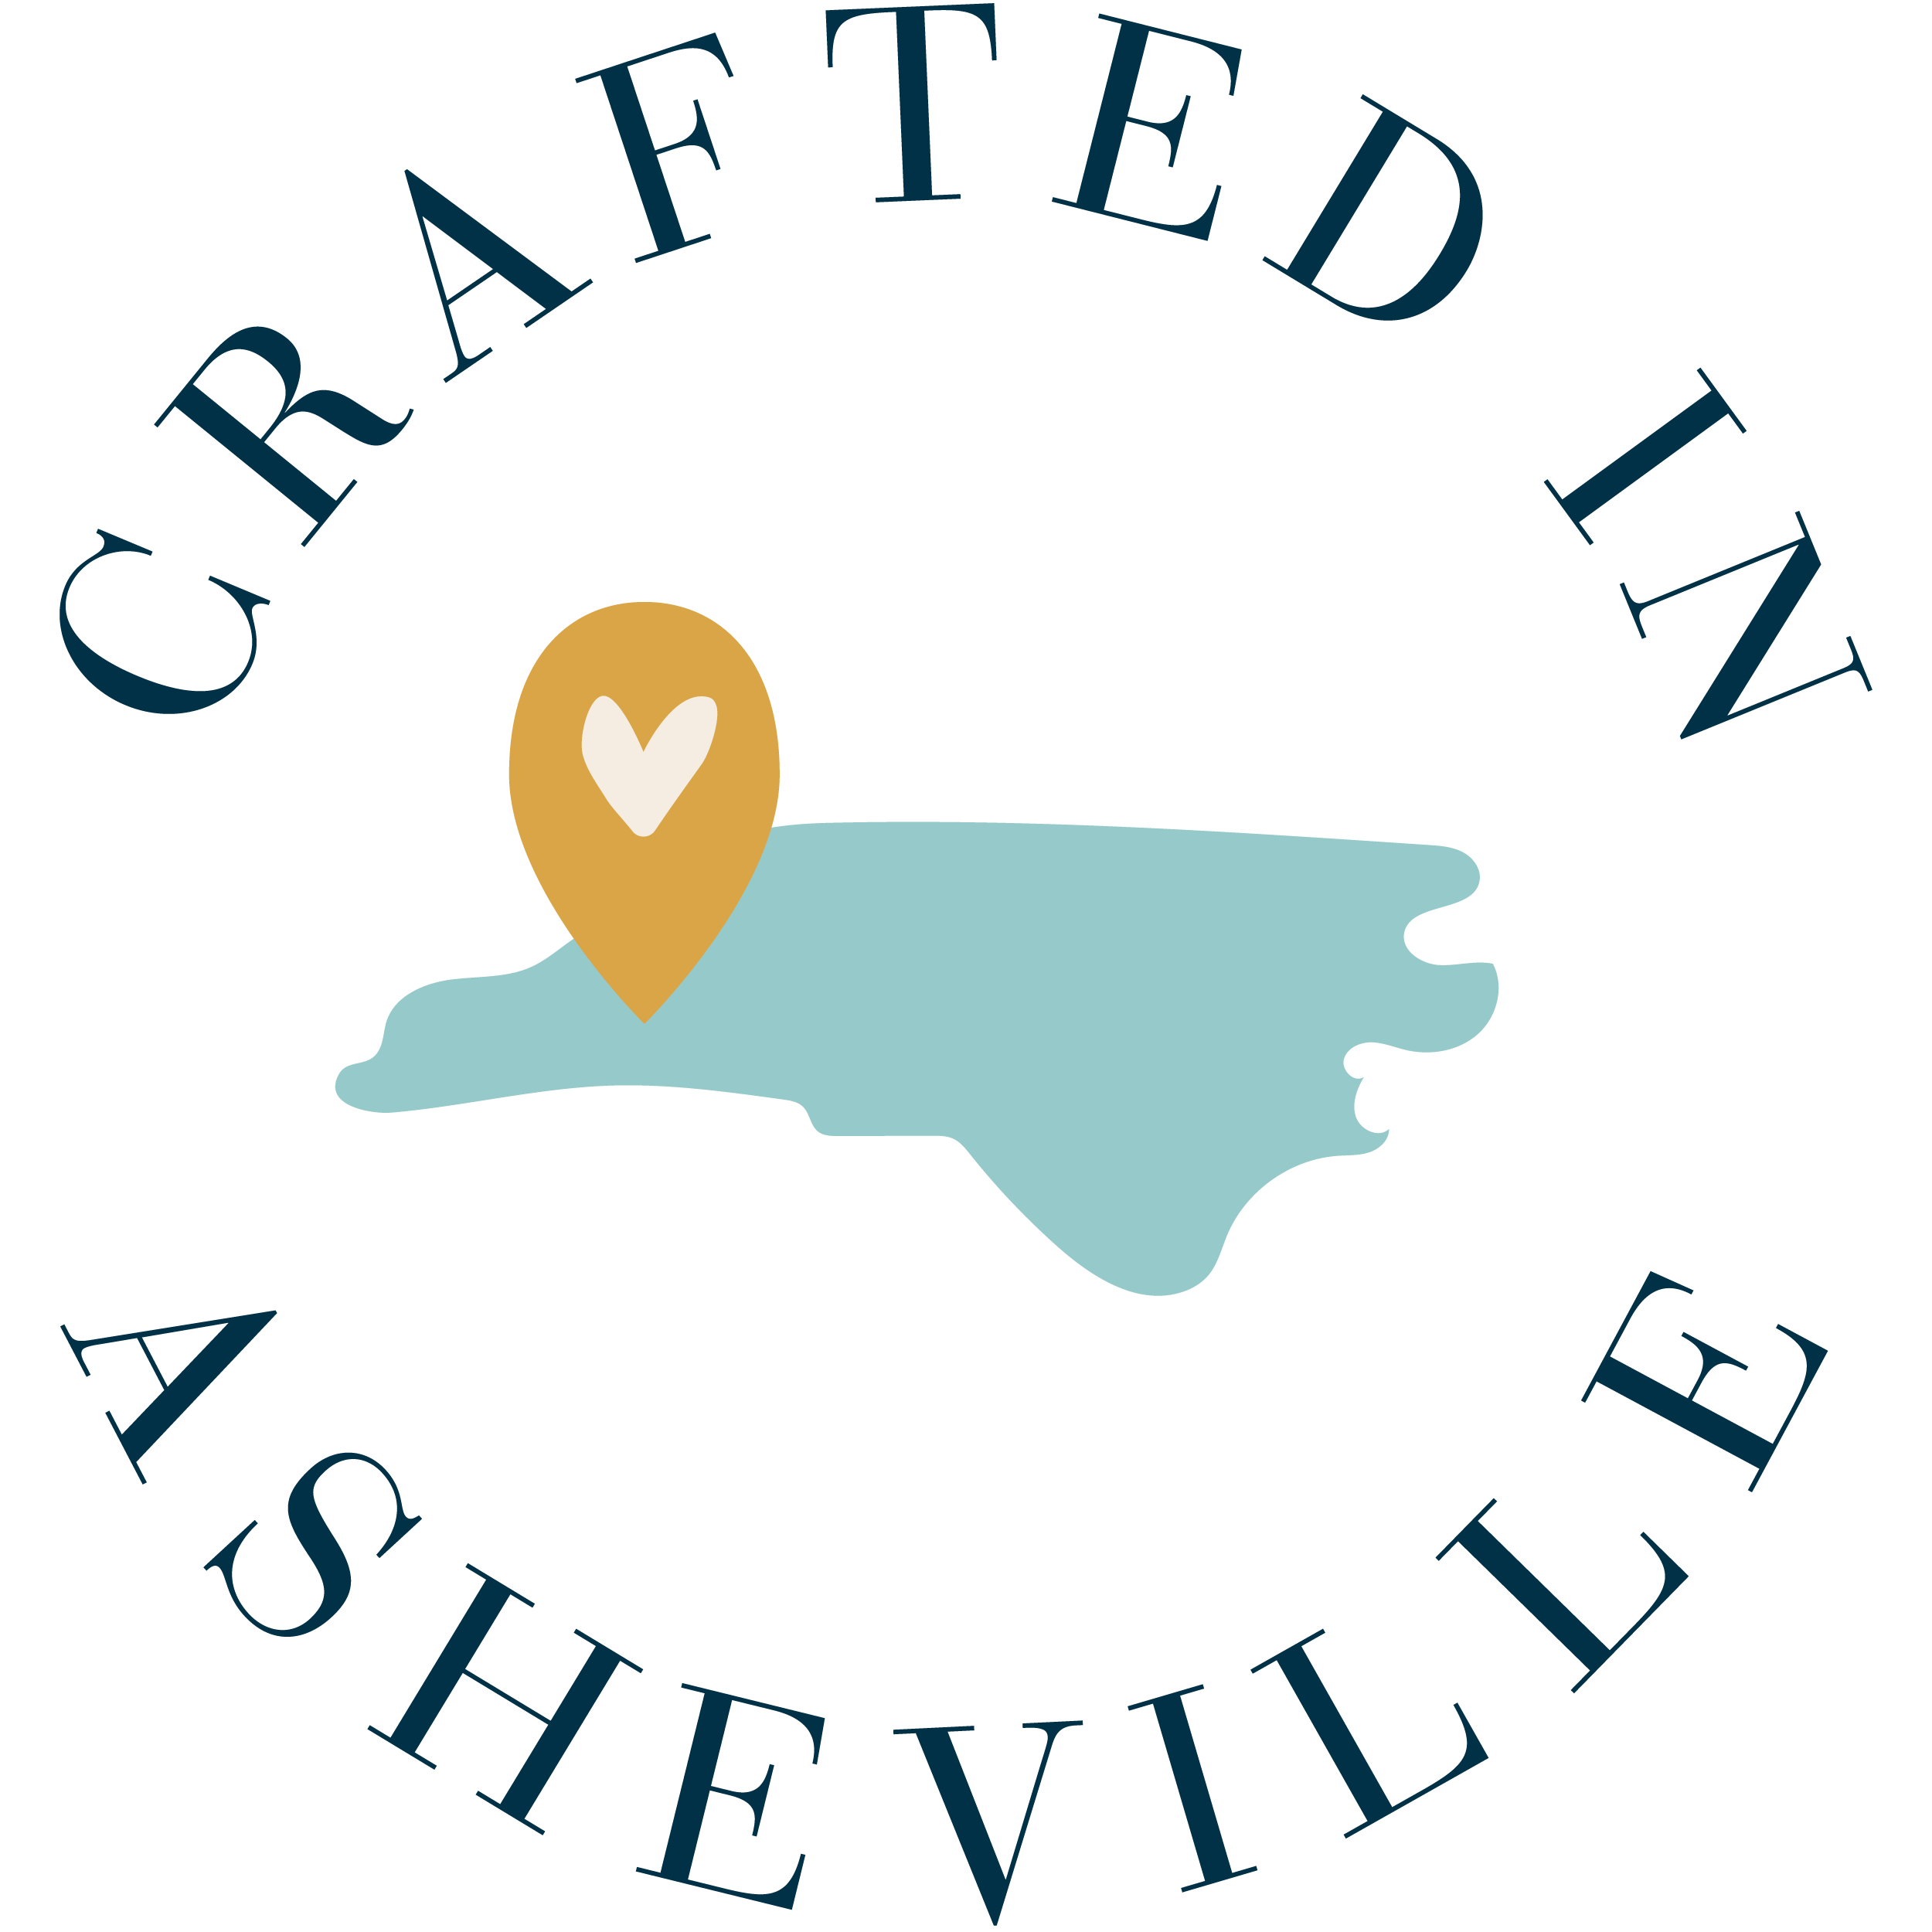 crafted in asheville, NC